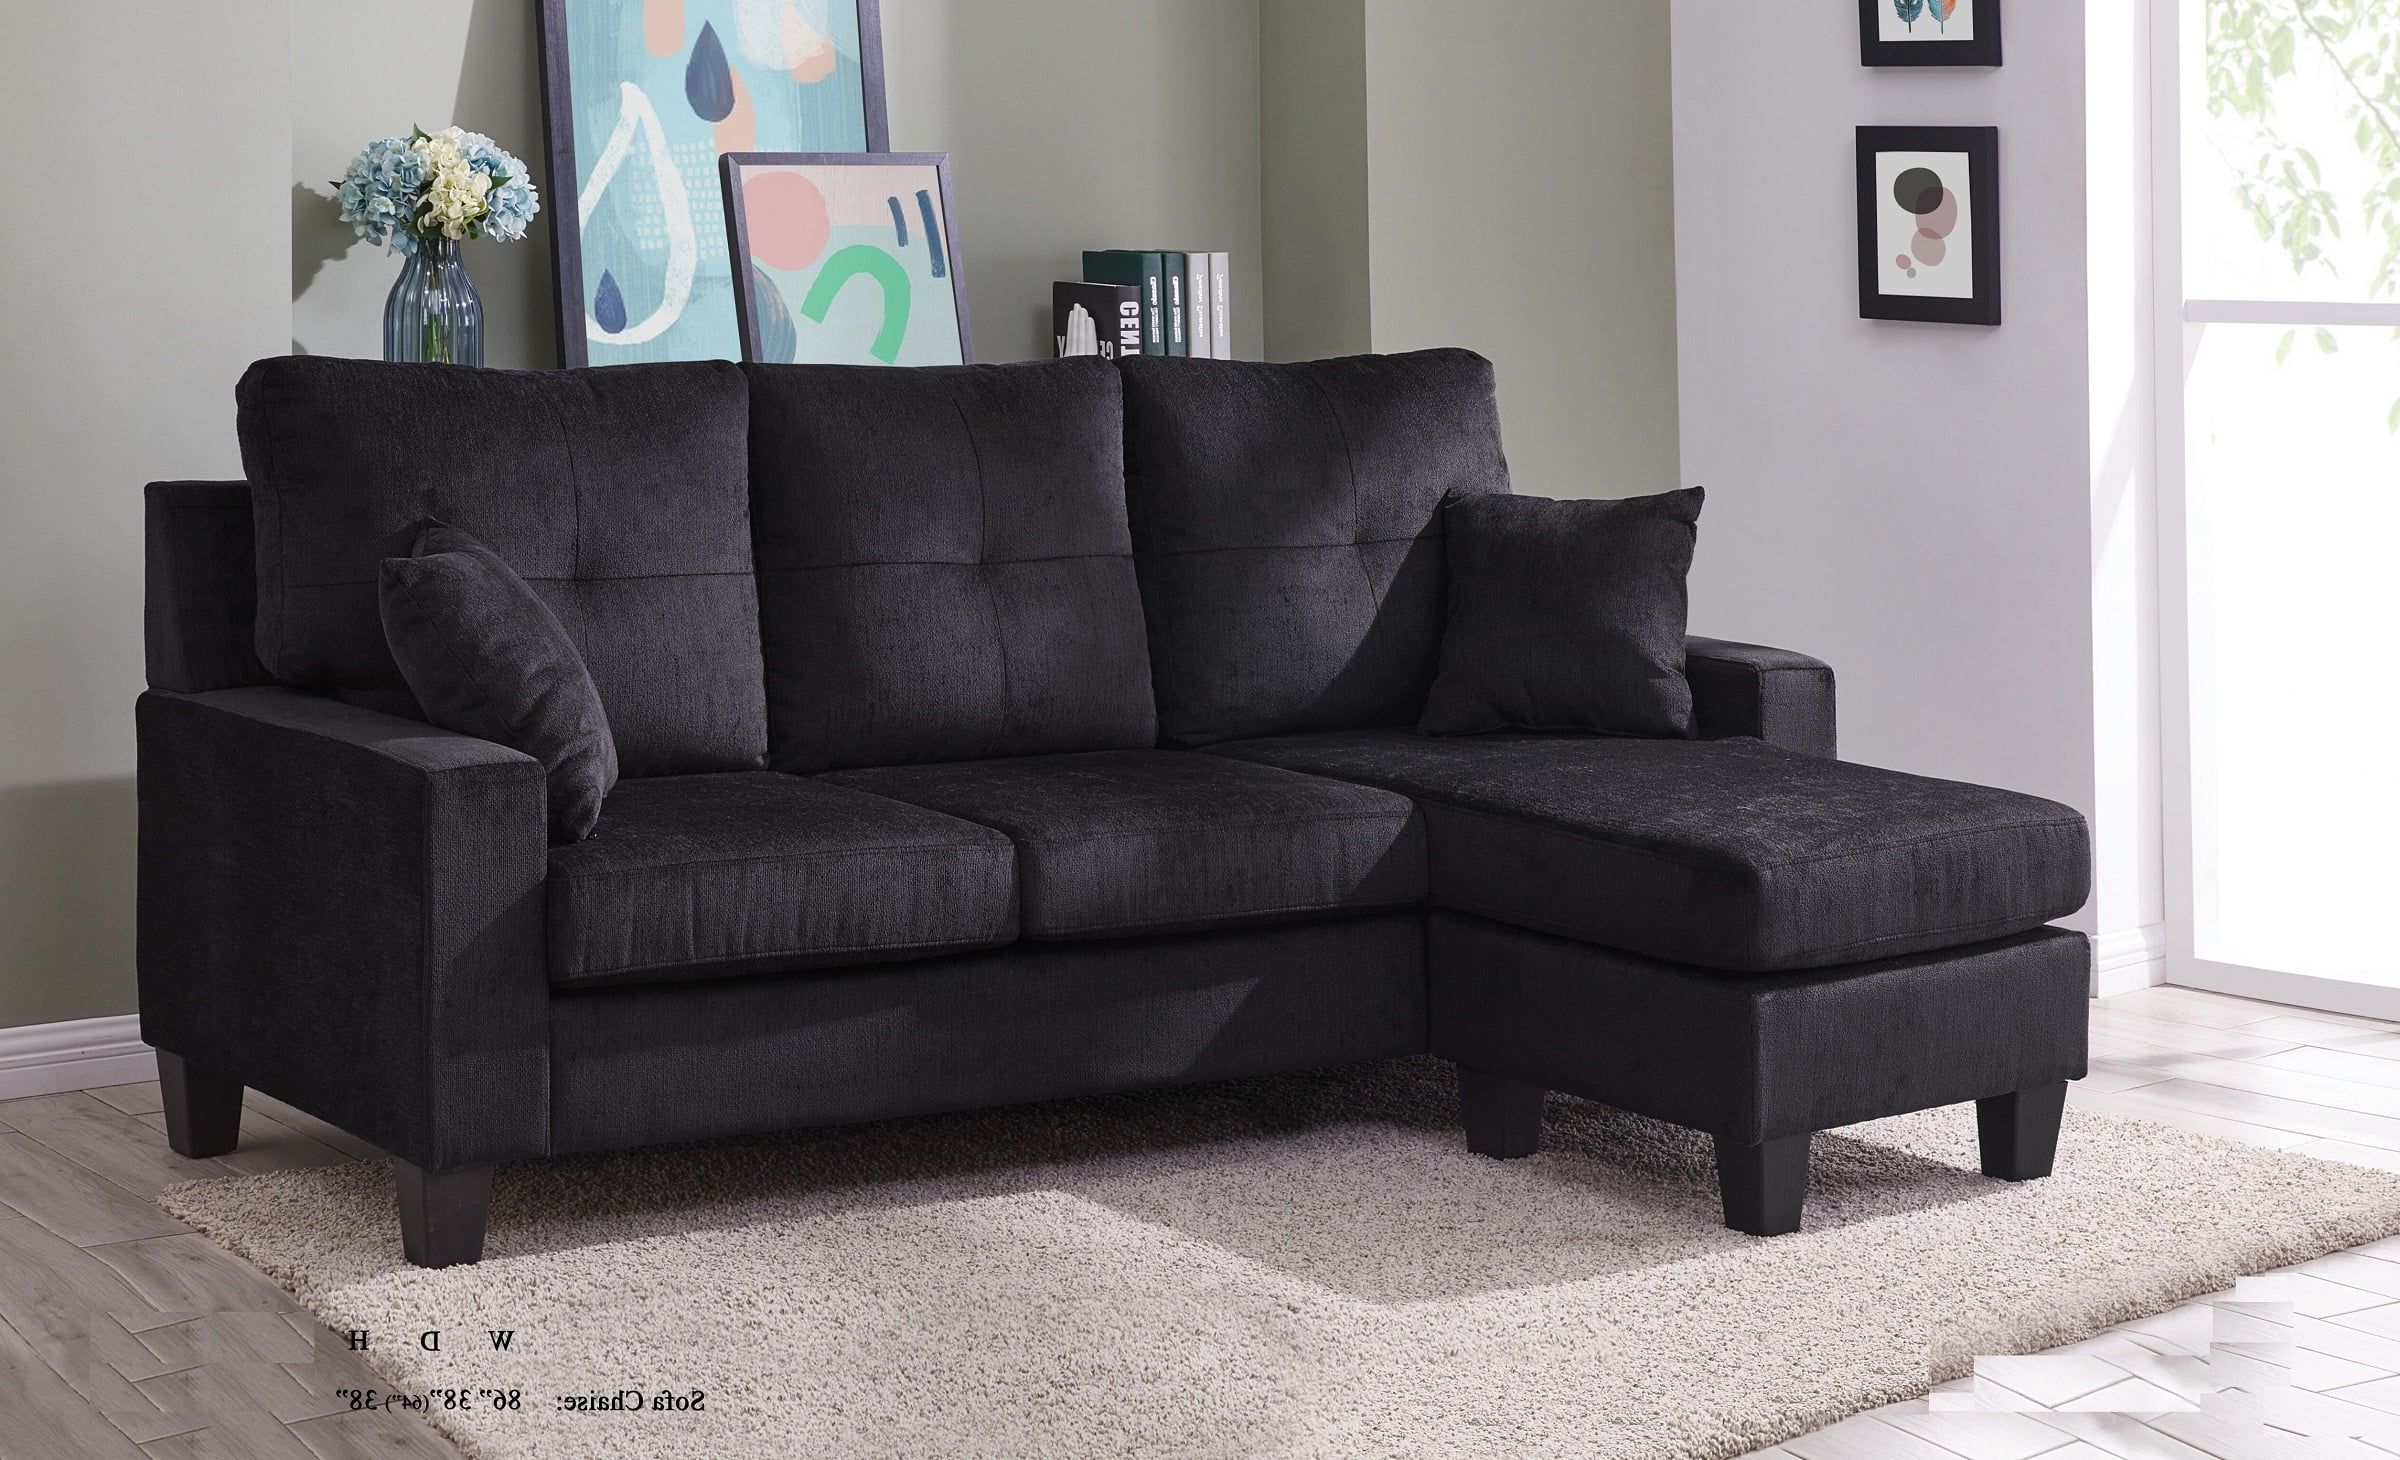 2017 Sectional Sofa Set Black Fabric Tufted Cushion Sofa Chaise Small Space Intended For Sofas In Black (Photo 11 of 15)